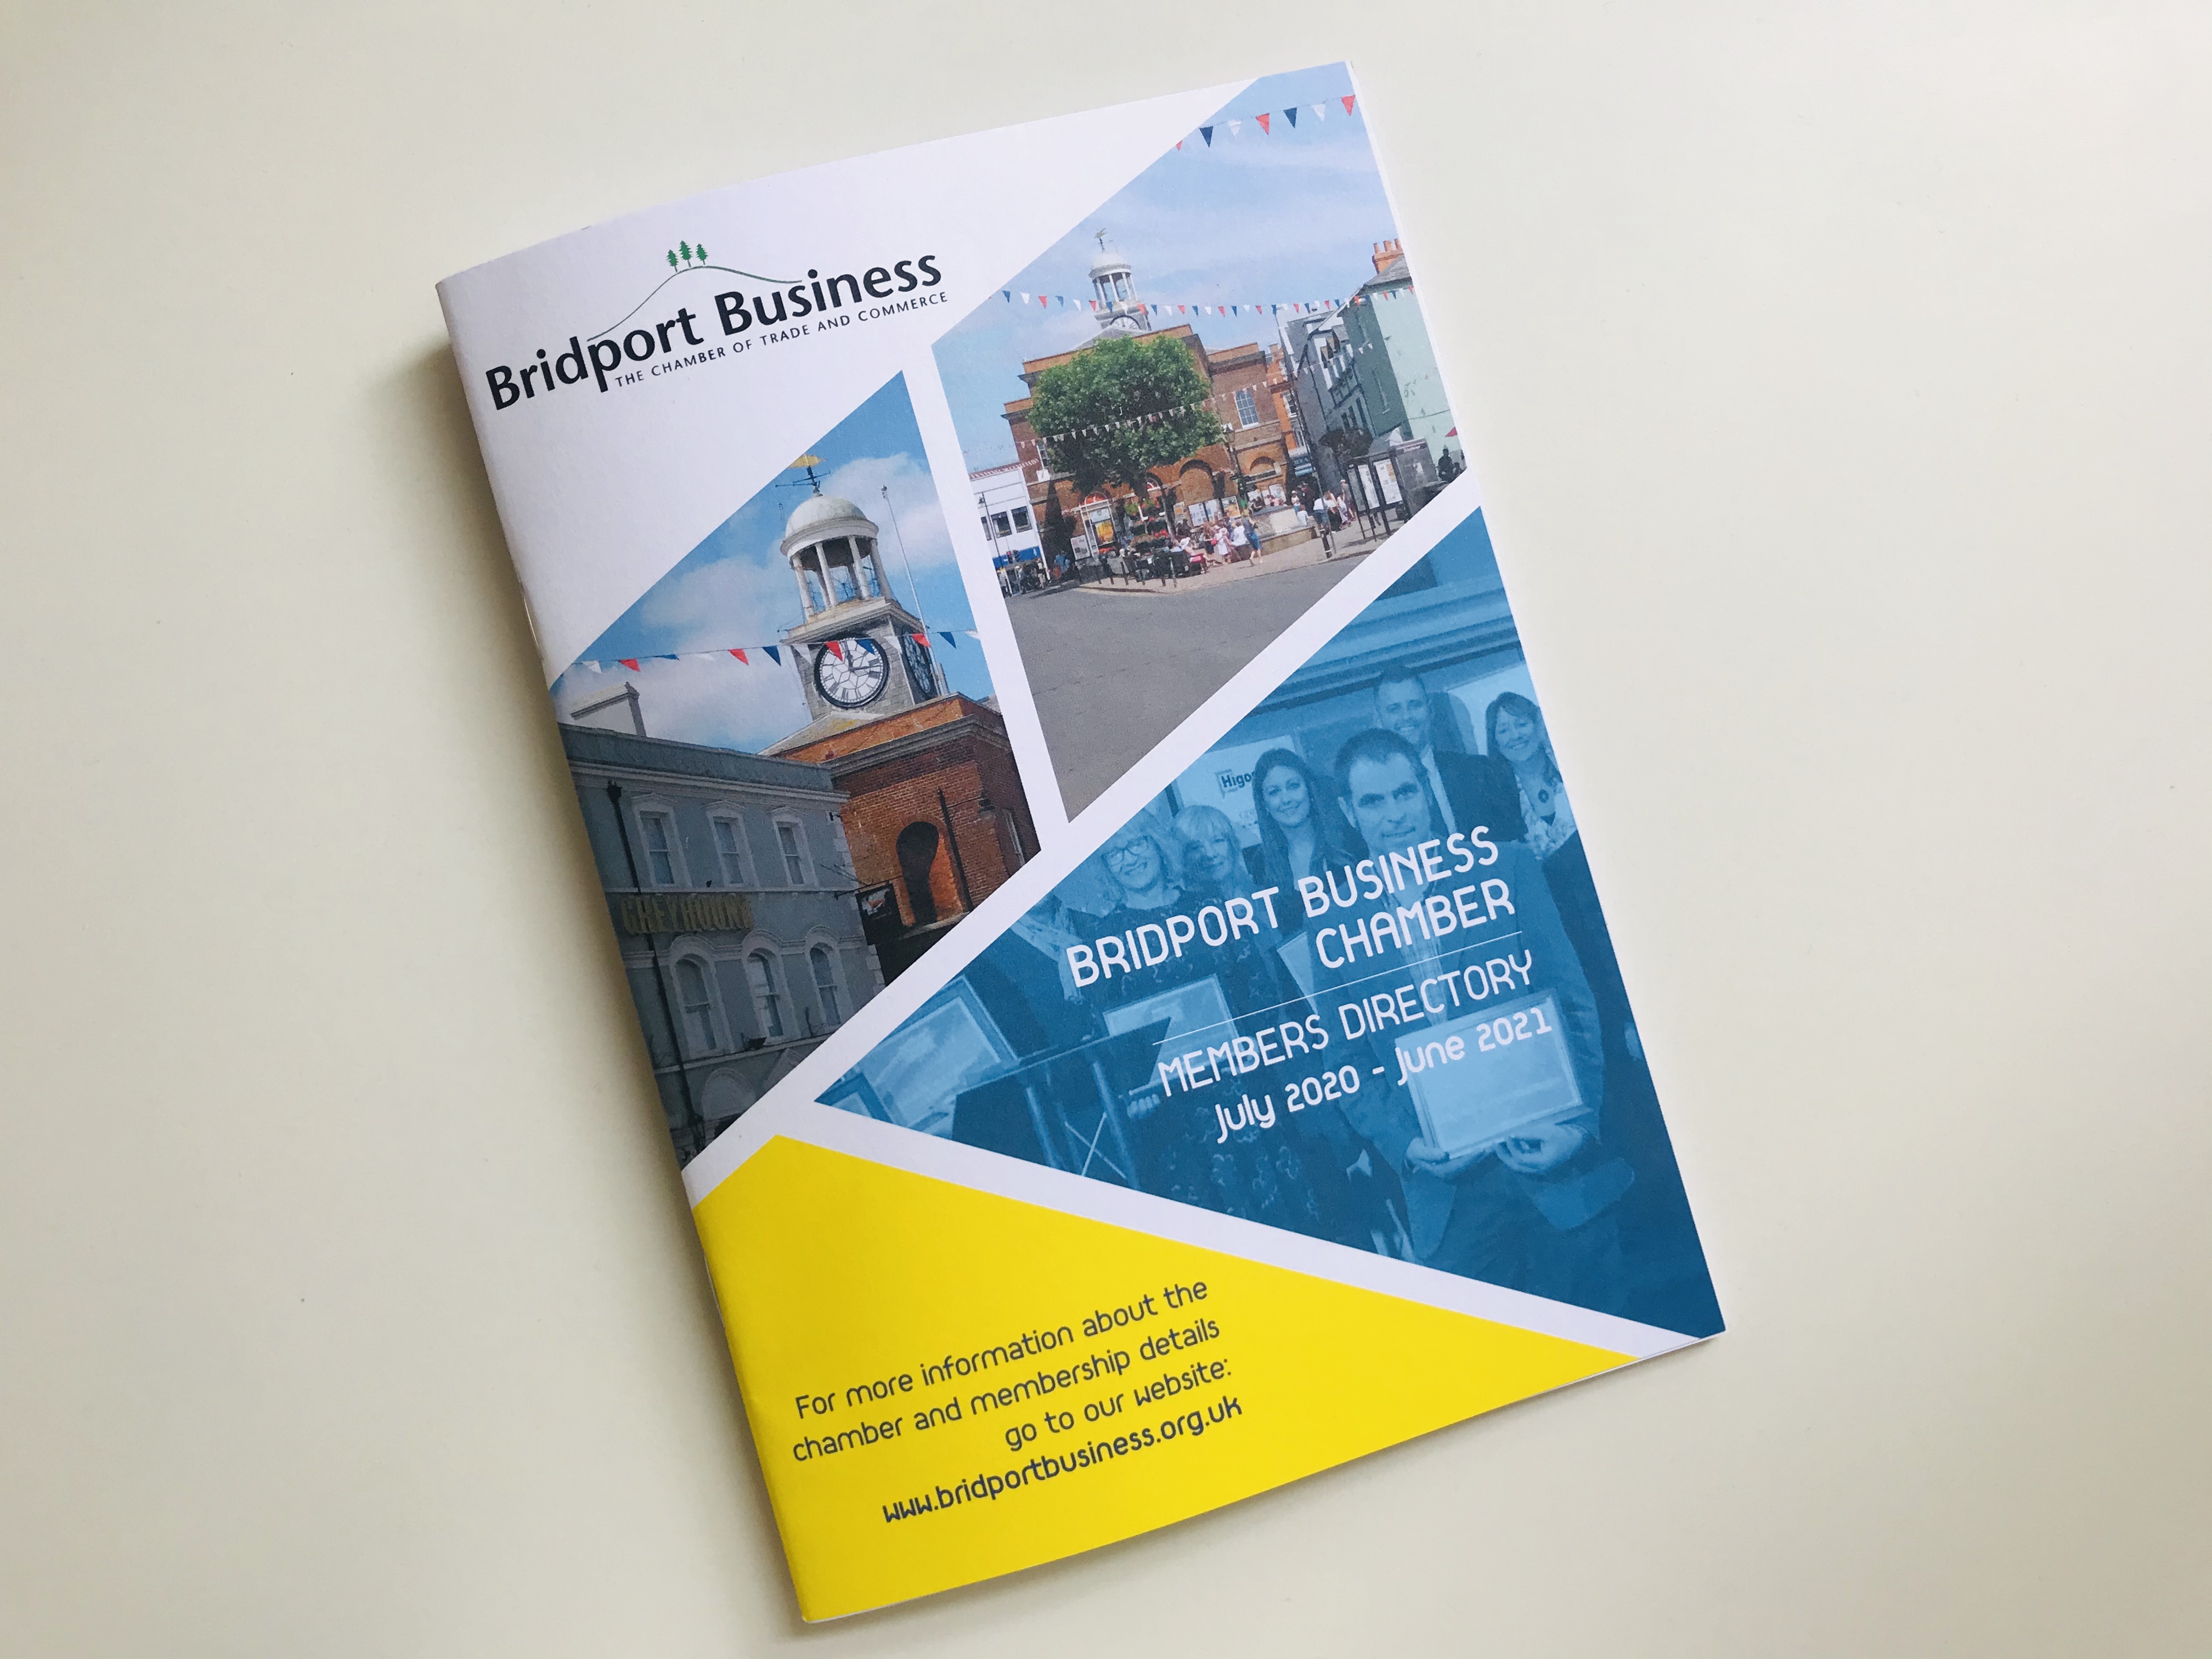 Bridport Business Chamber Directory – Available Now!